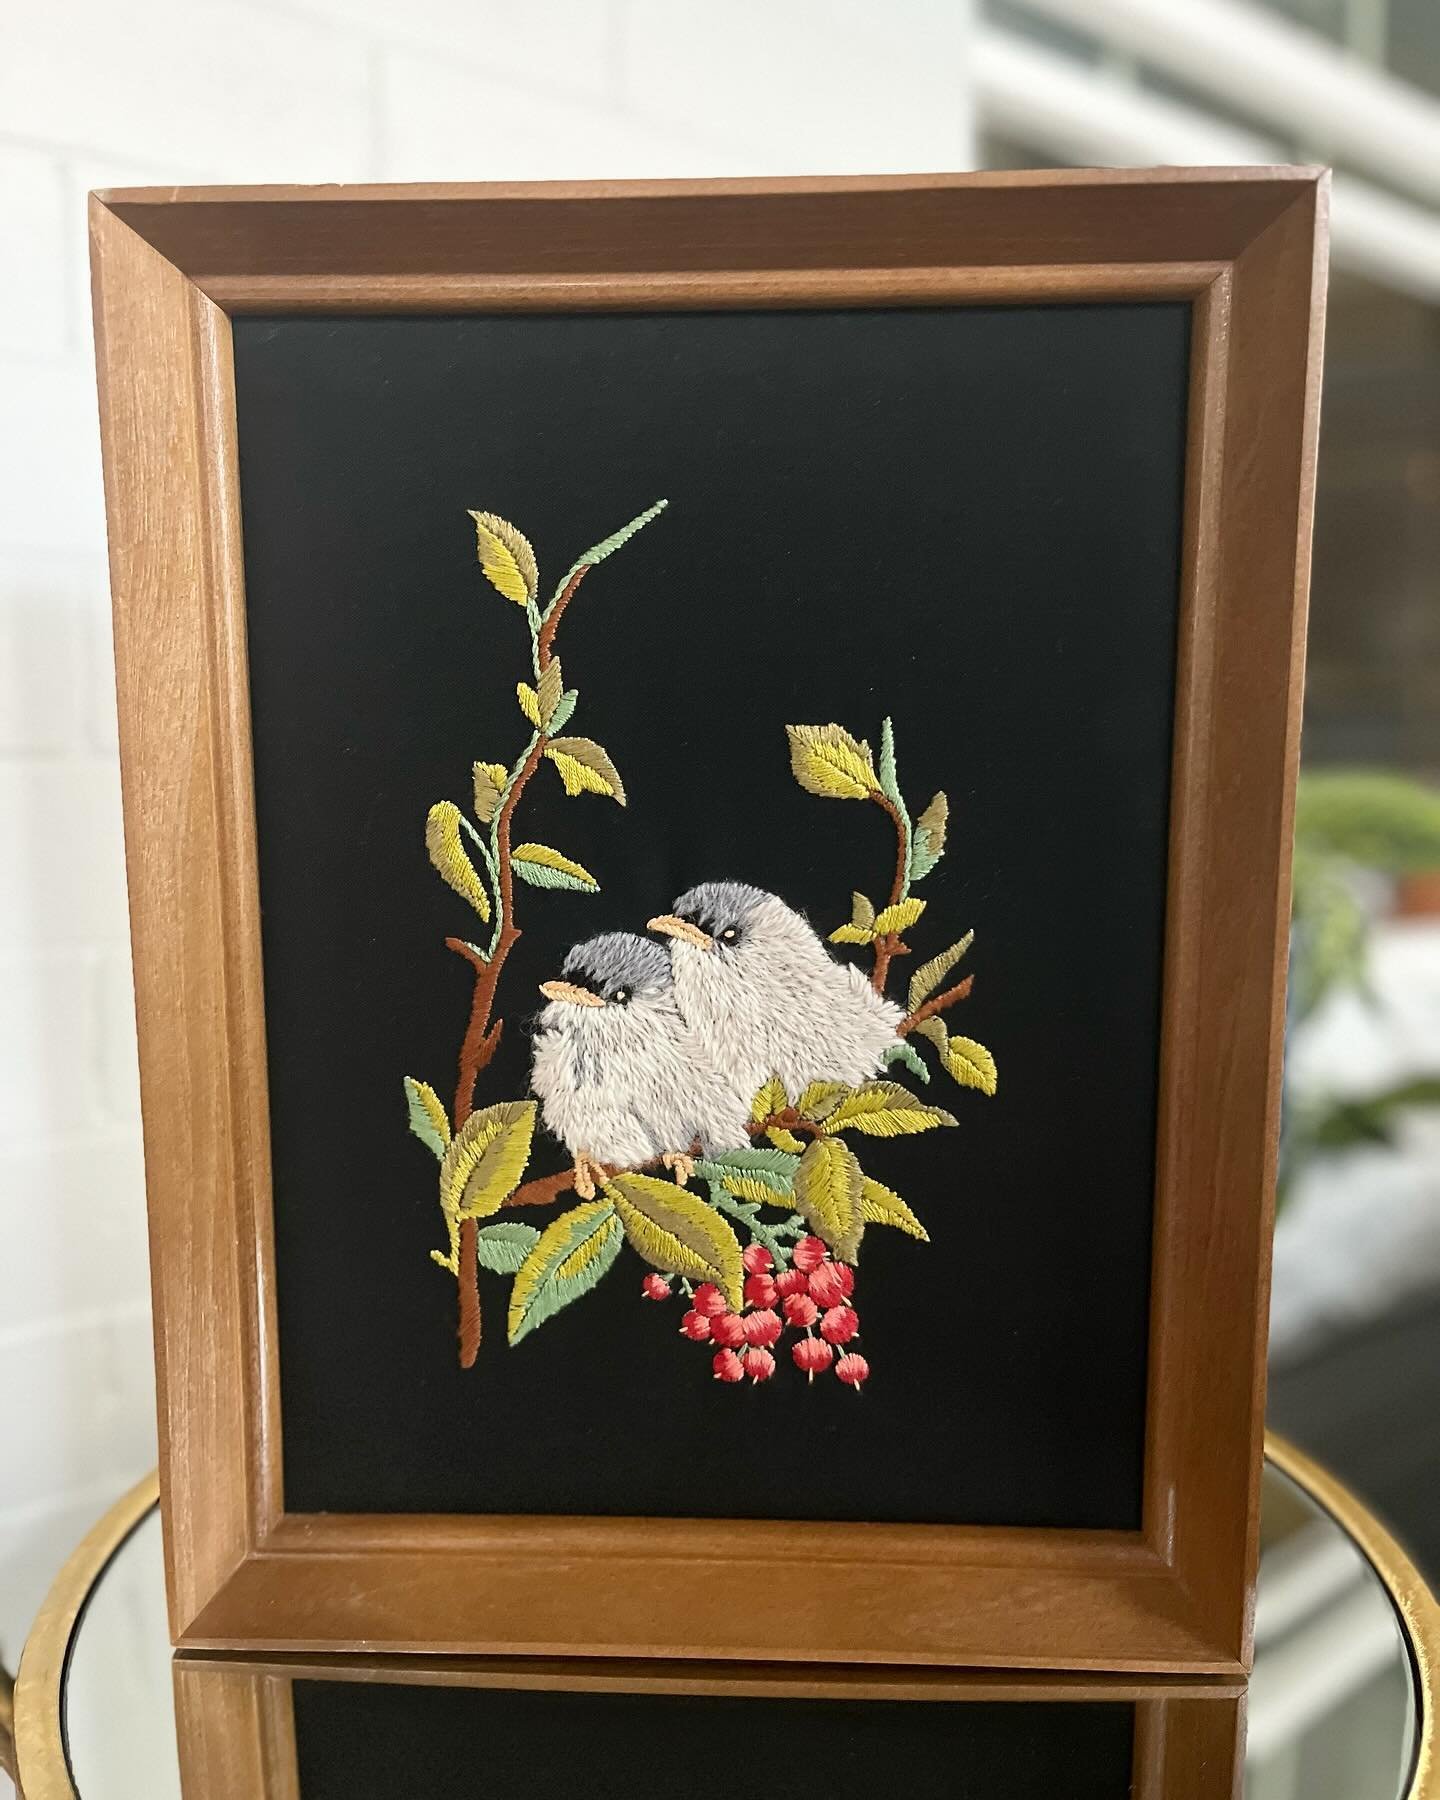 Framed Vintage Janlynn Crewel &ldquo;Birdies&rdquo;Embroidery Stitchery - 9 x 12&rdquo;. Available for $38 and absolutely adorable. 

Vintage items are pre-owned and may show signs of age, love, and character.

- Comment SOLD on item or DM to purchas